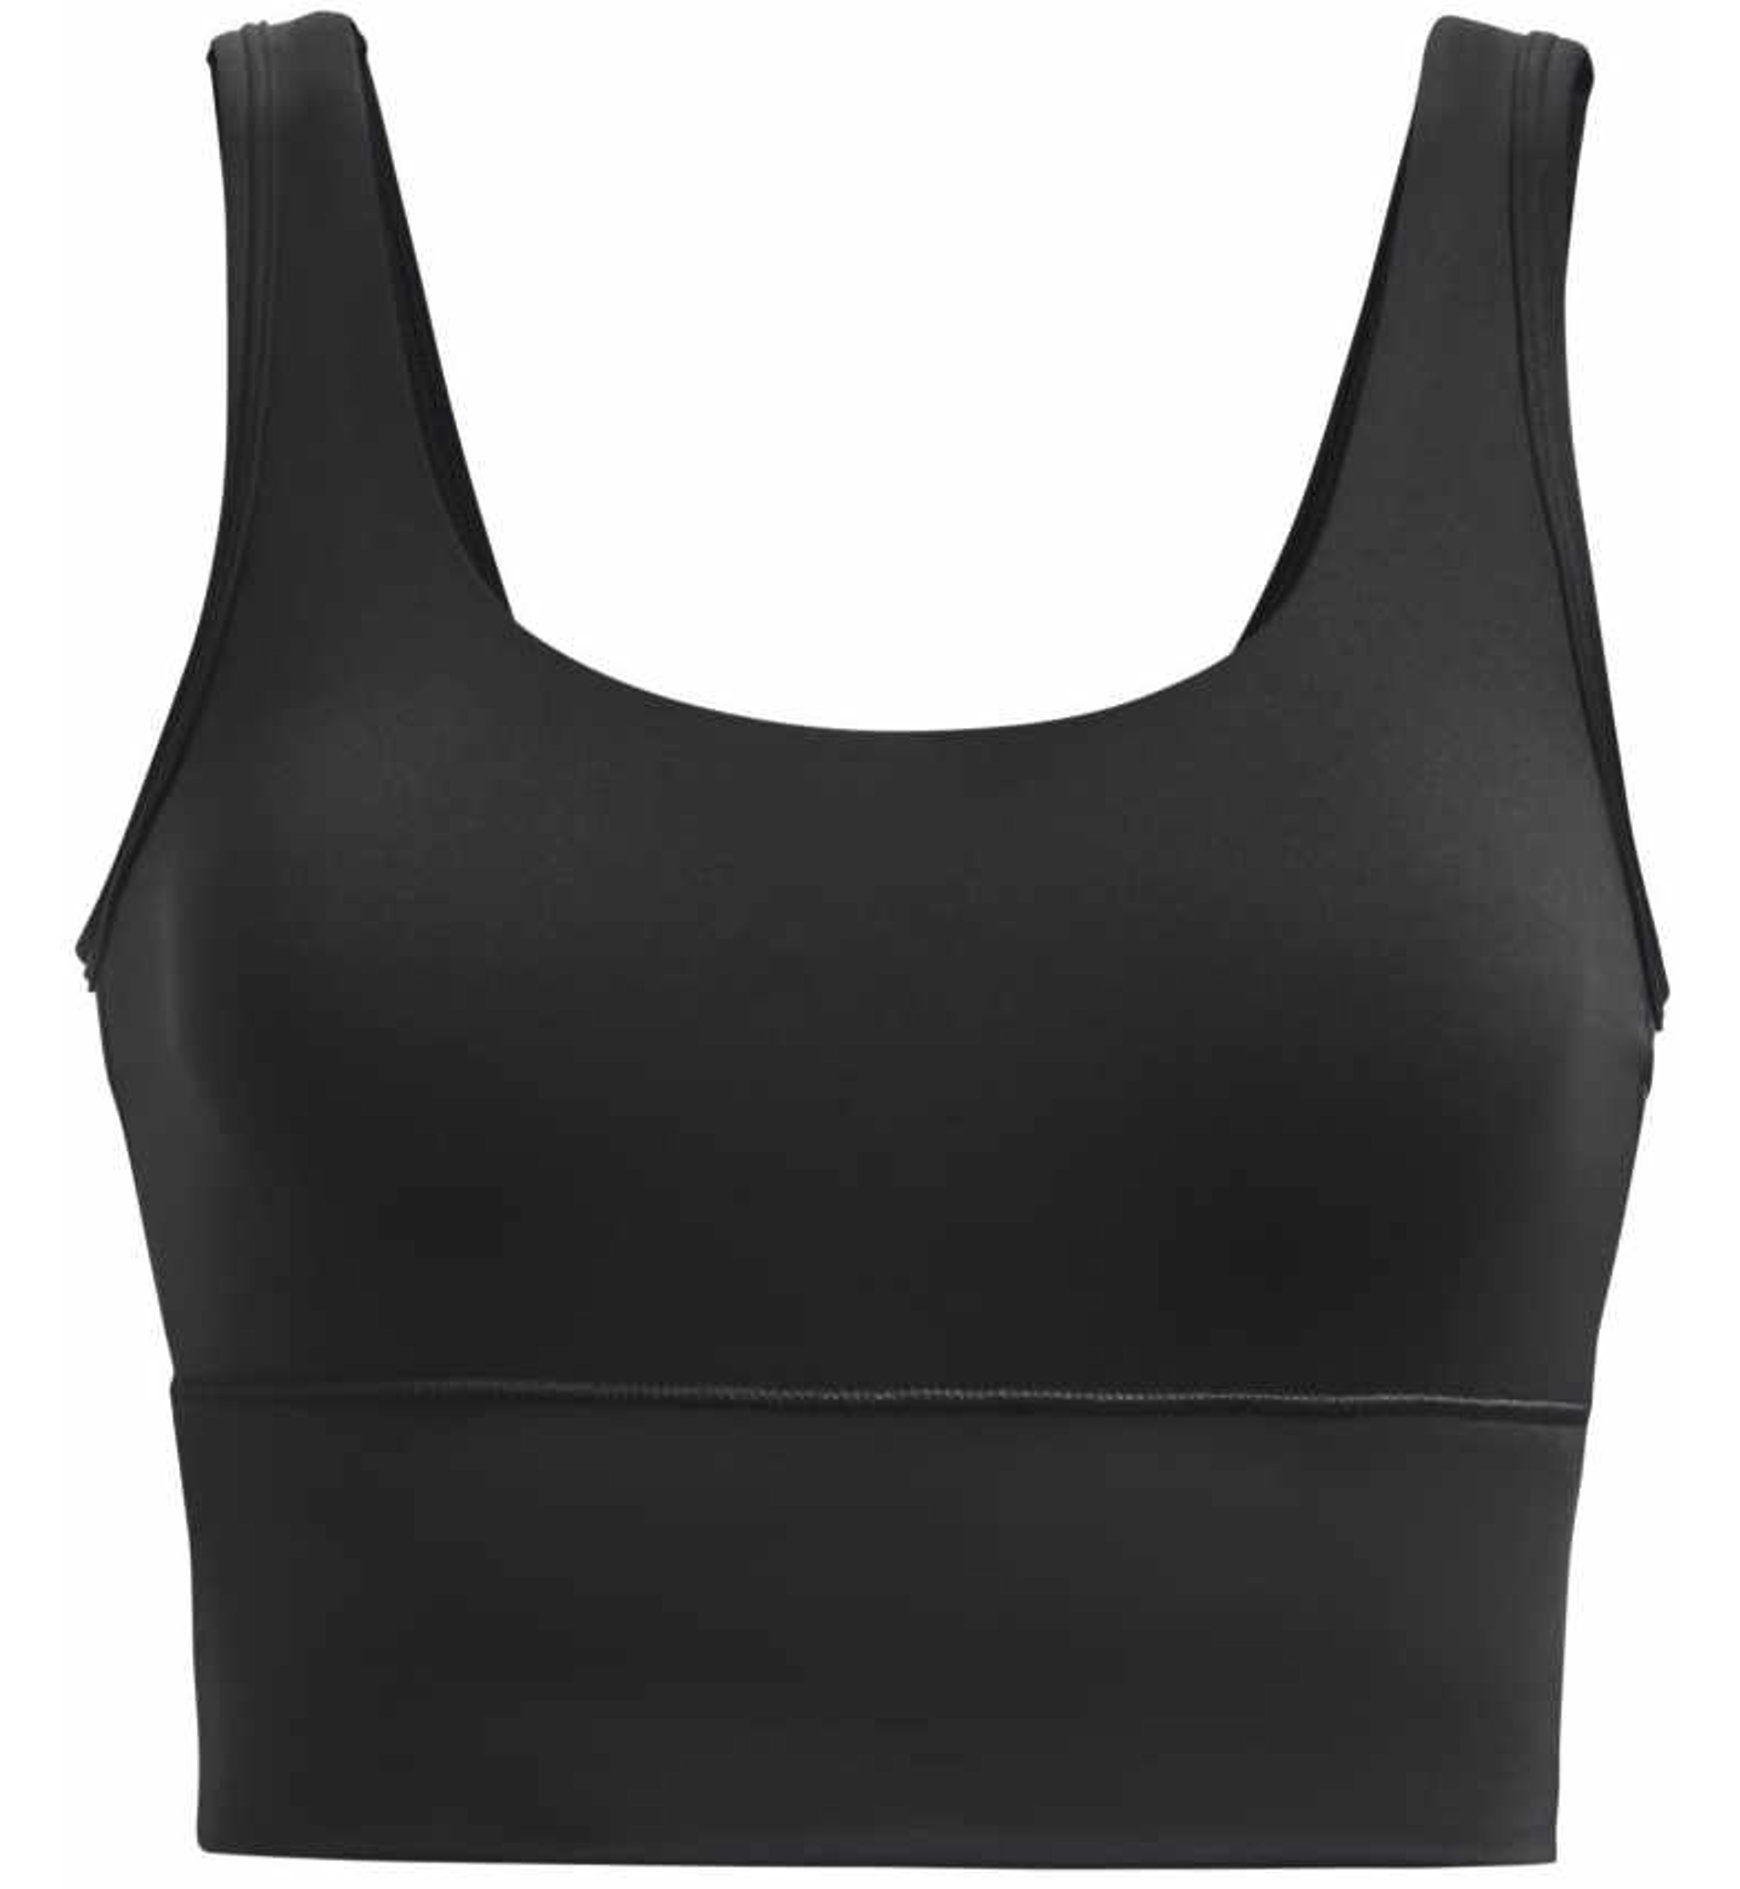 Under Armour Meridian Fitted Crop W Top Damen